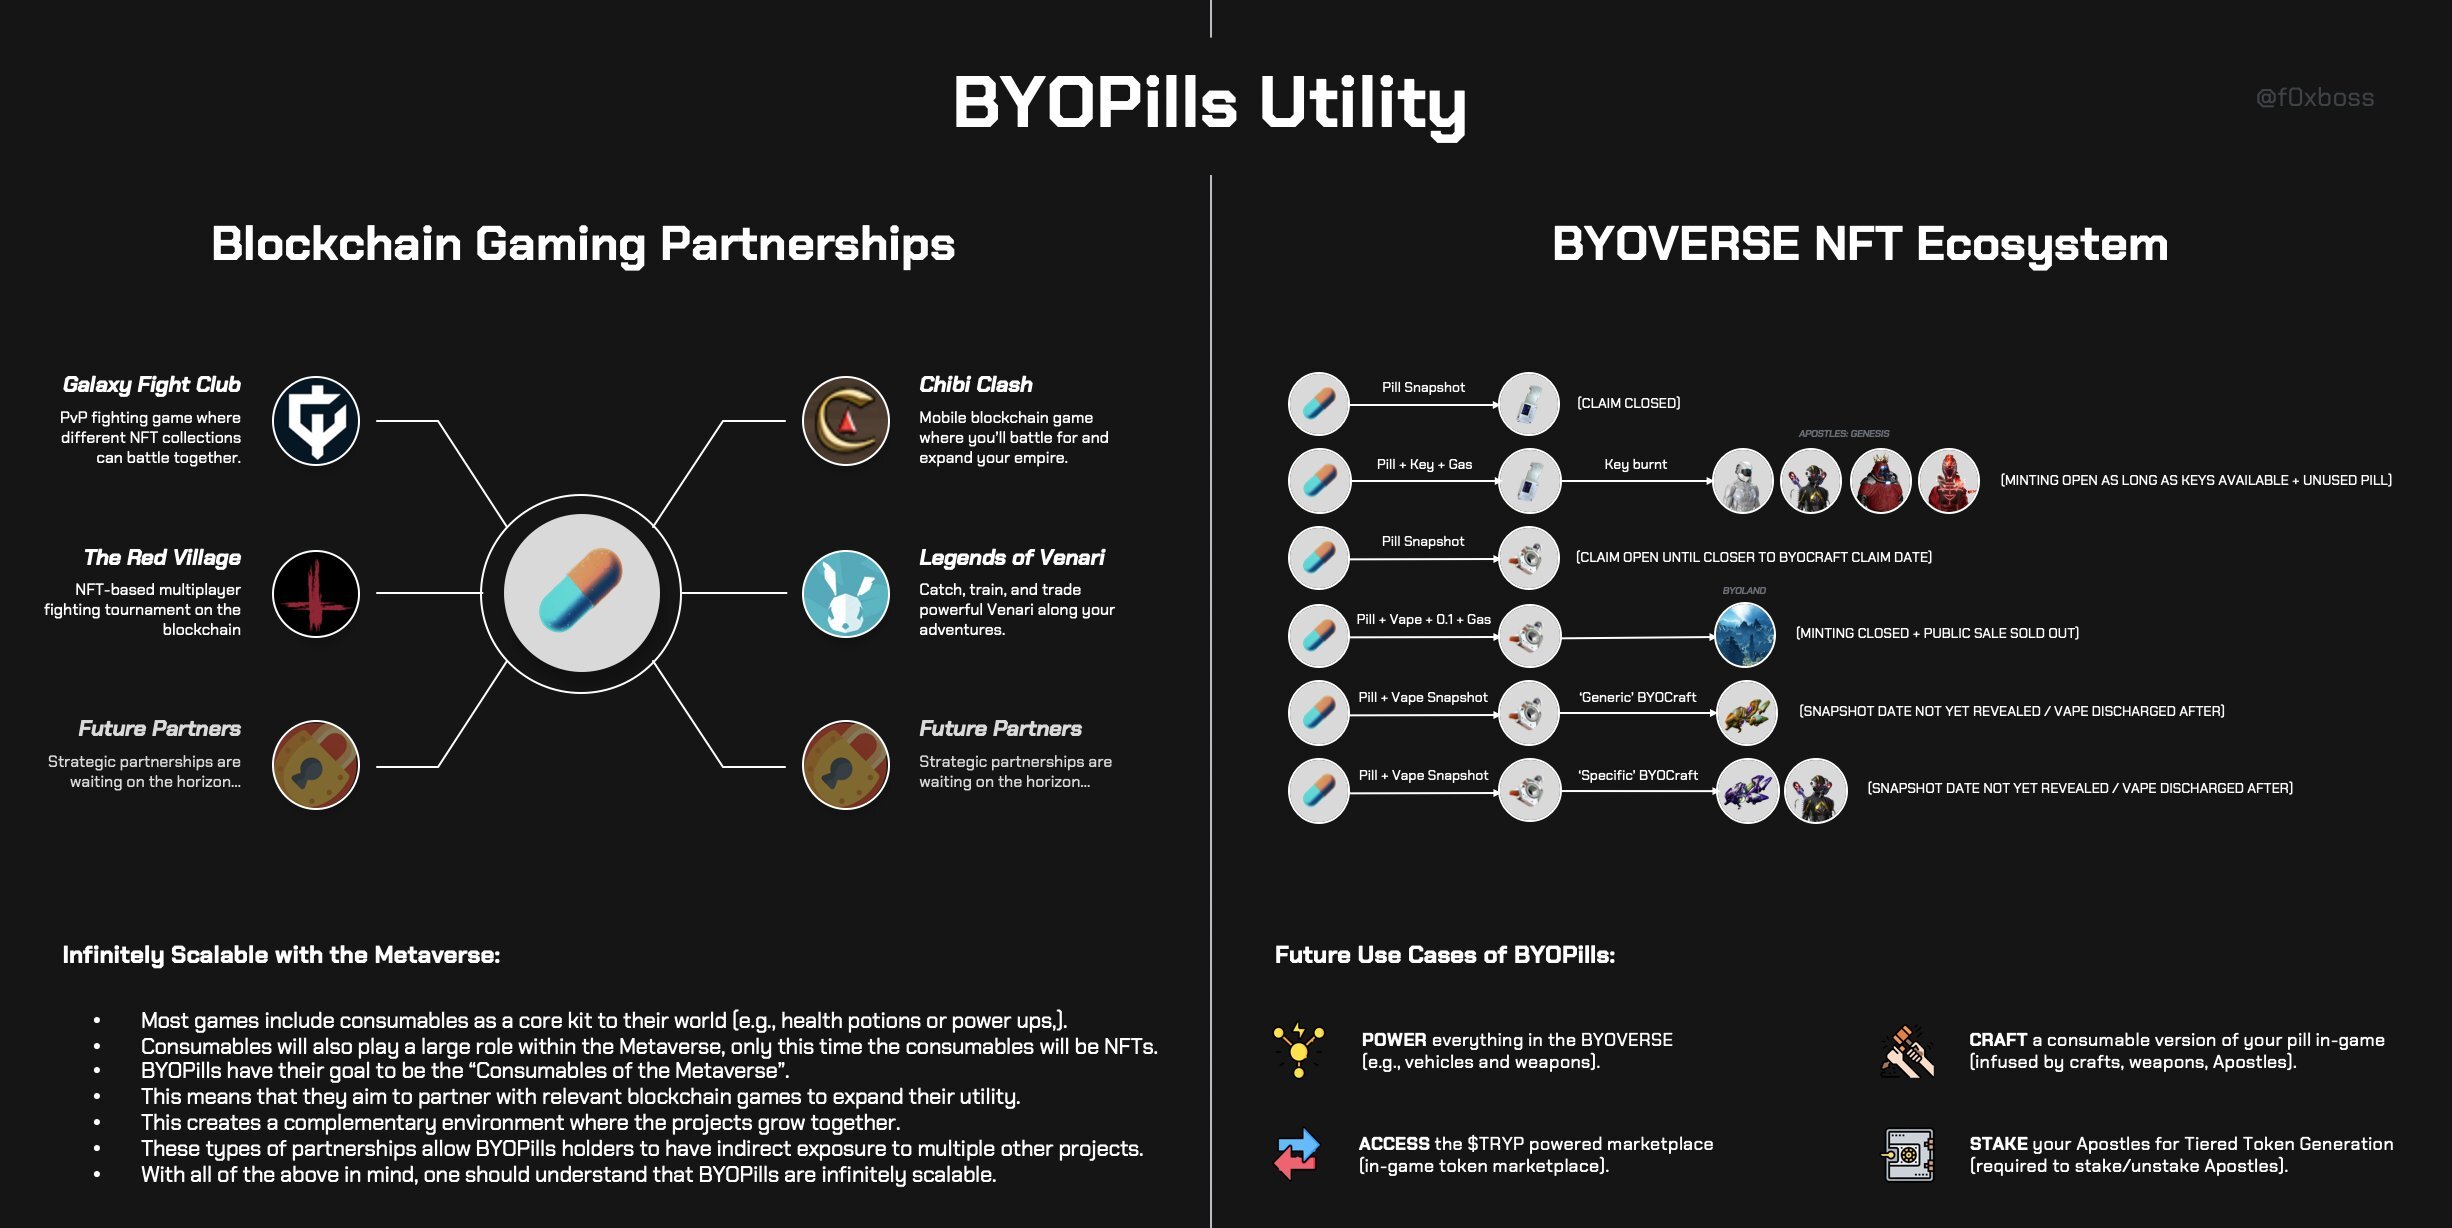 Overview of BYOPills utility